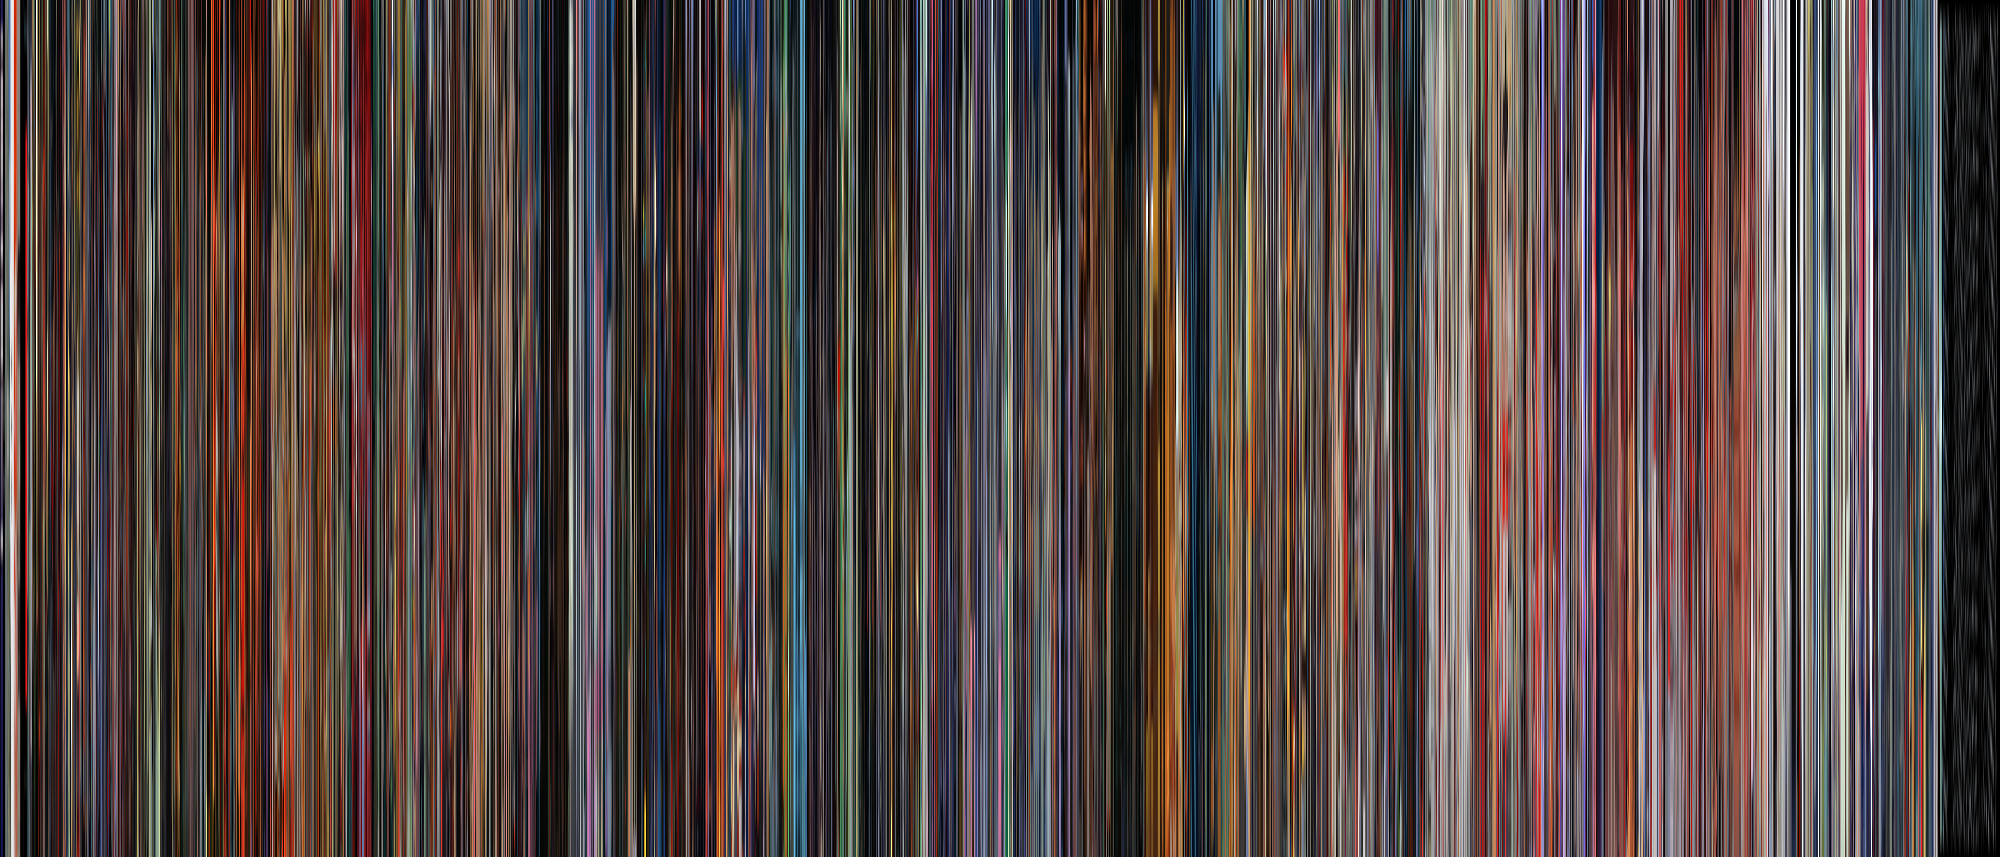 Akira barcode, generated with smoothing set to 5 at 7467 x 3200 and scaled down to 2000.